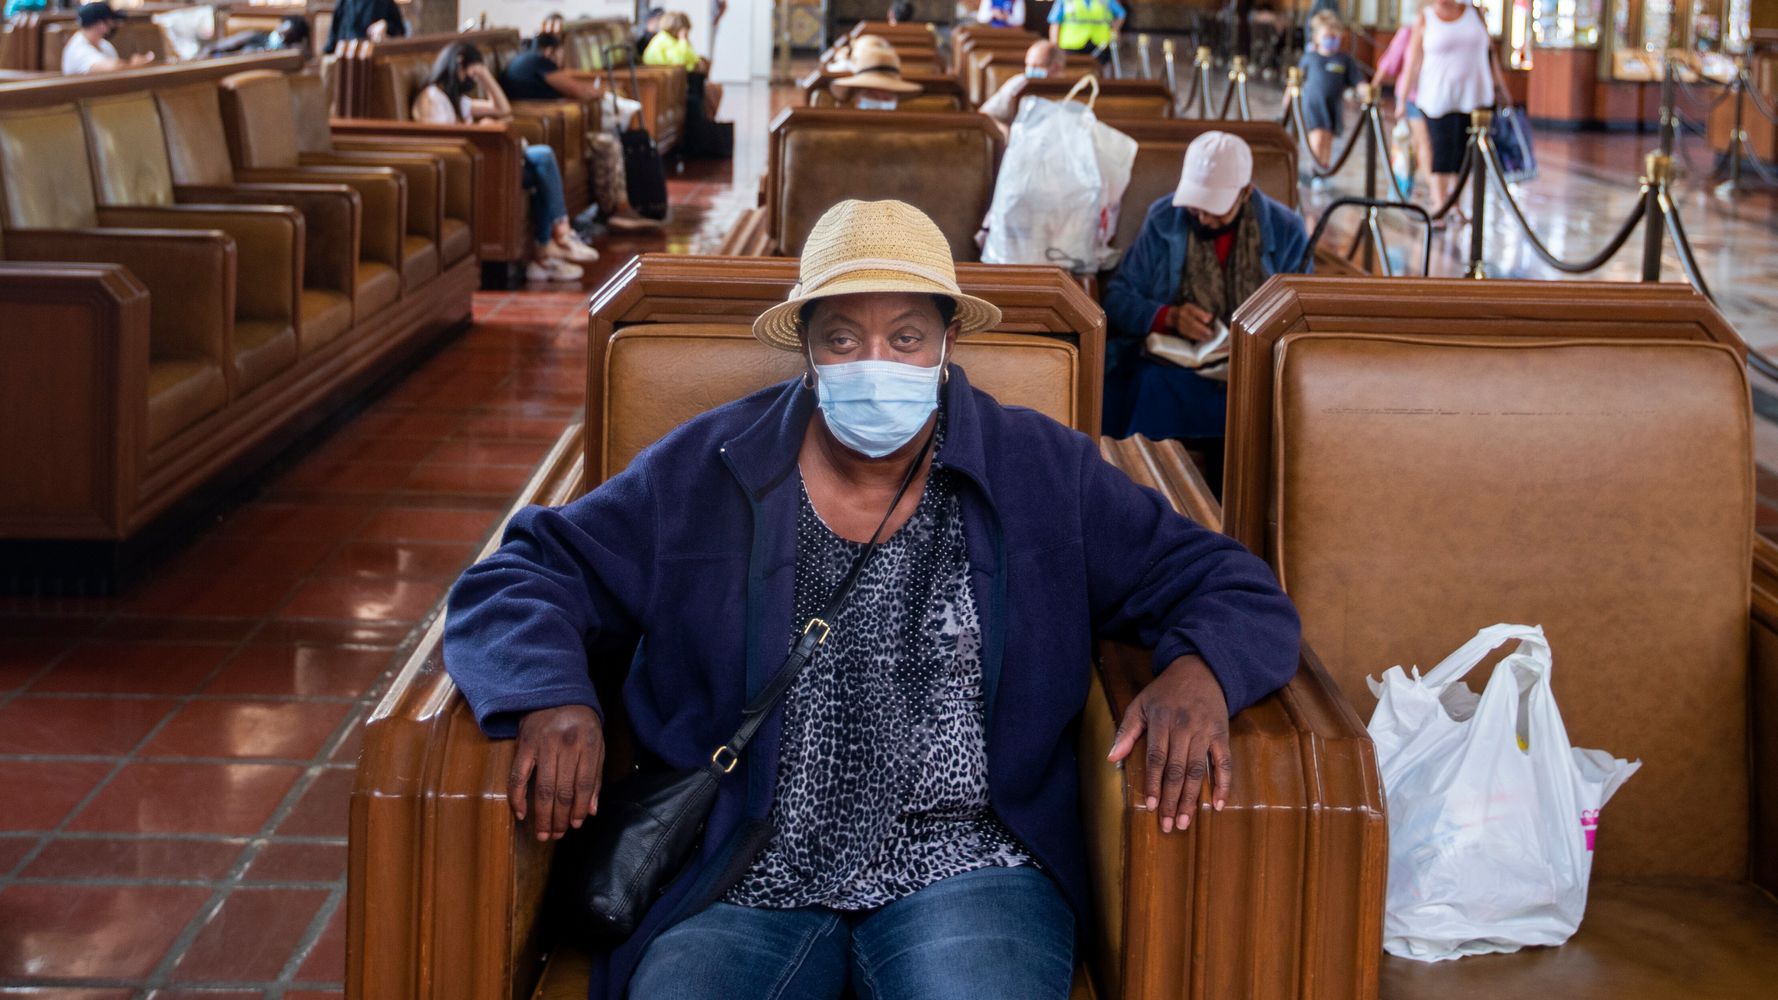 L.A. County To Require Masks Indoors For All As Delta Strain Of COVID-19 Surges